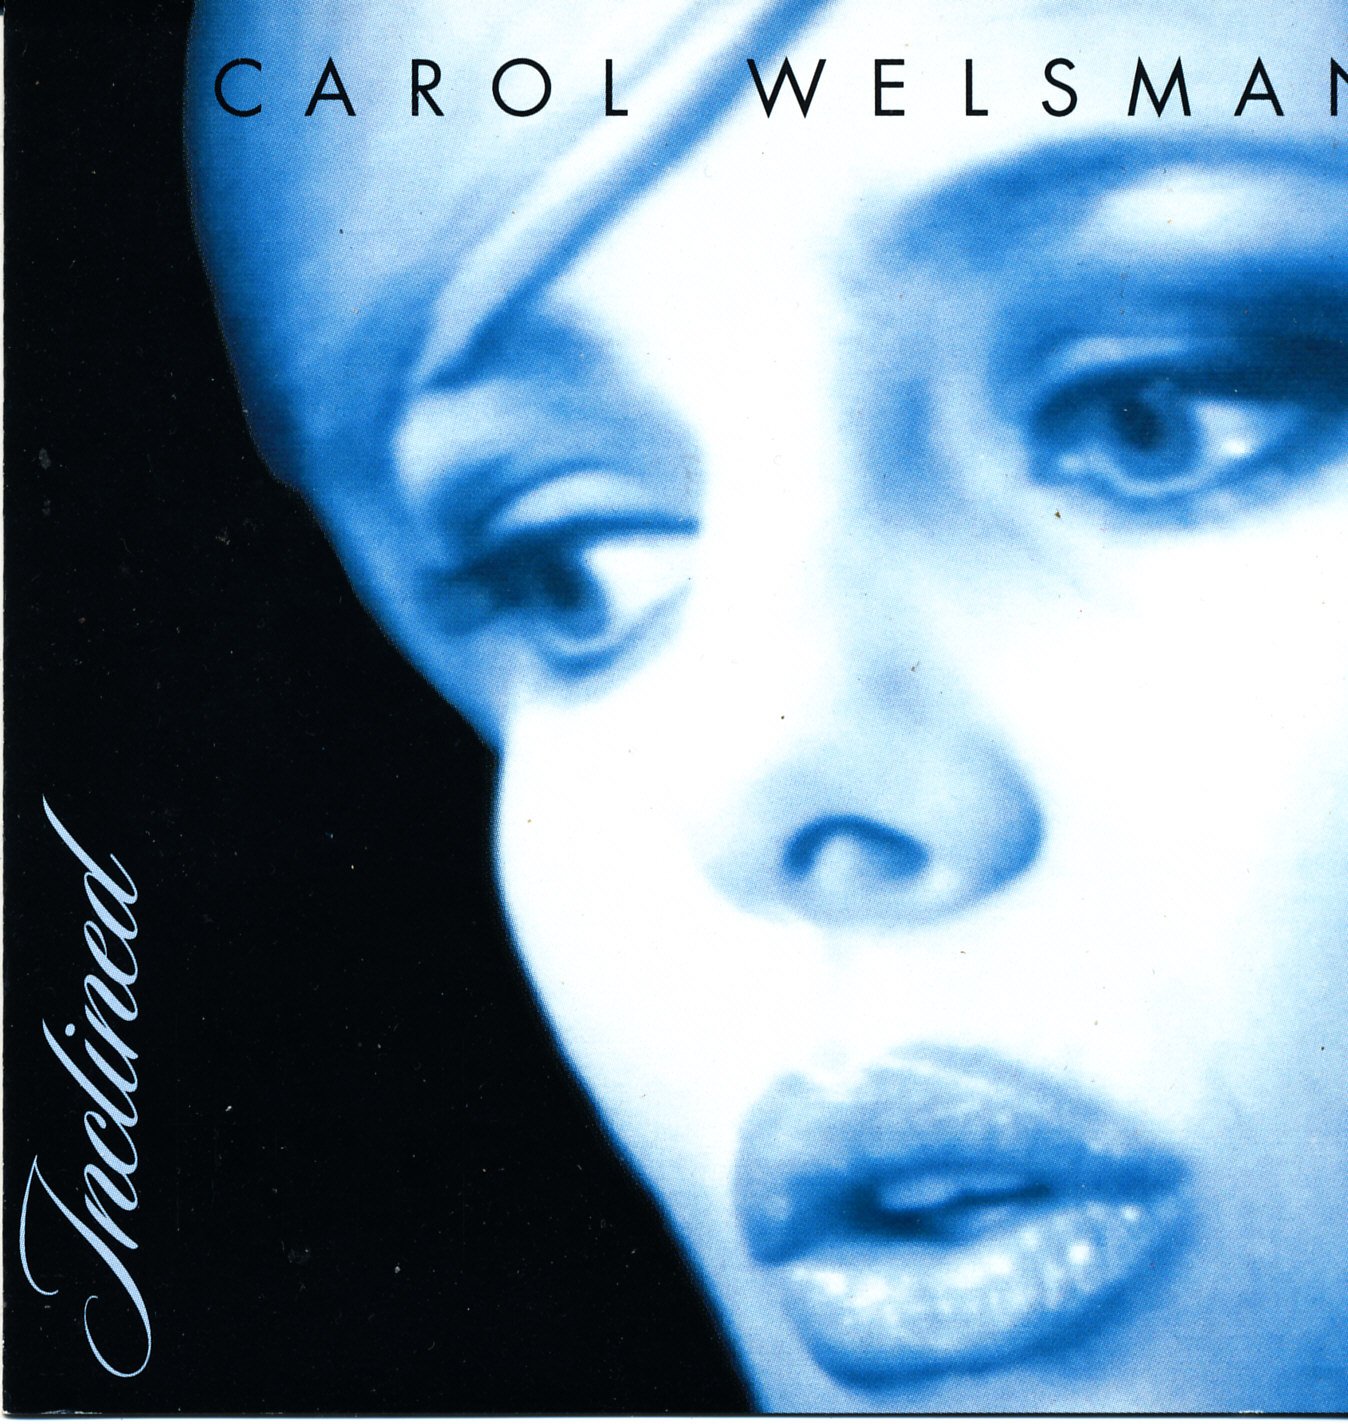 CAROL WELSMAN - Inclined cover 